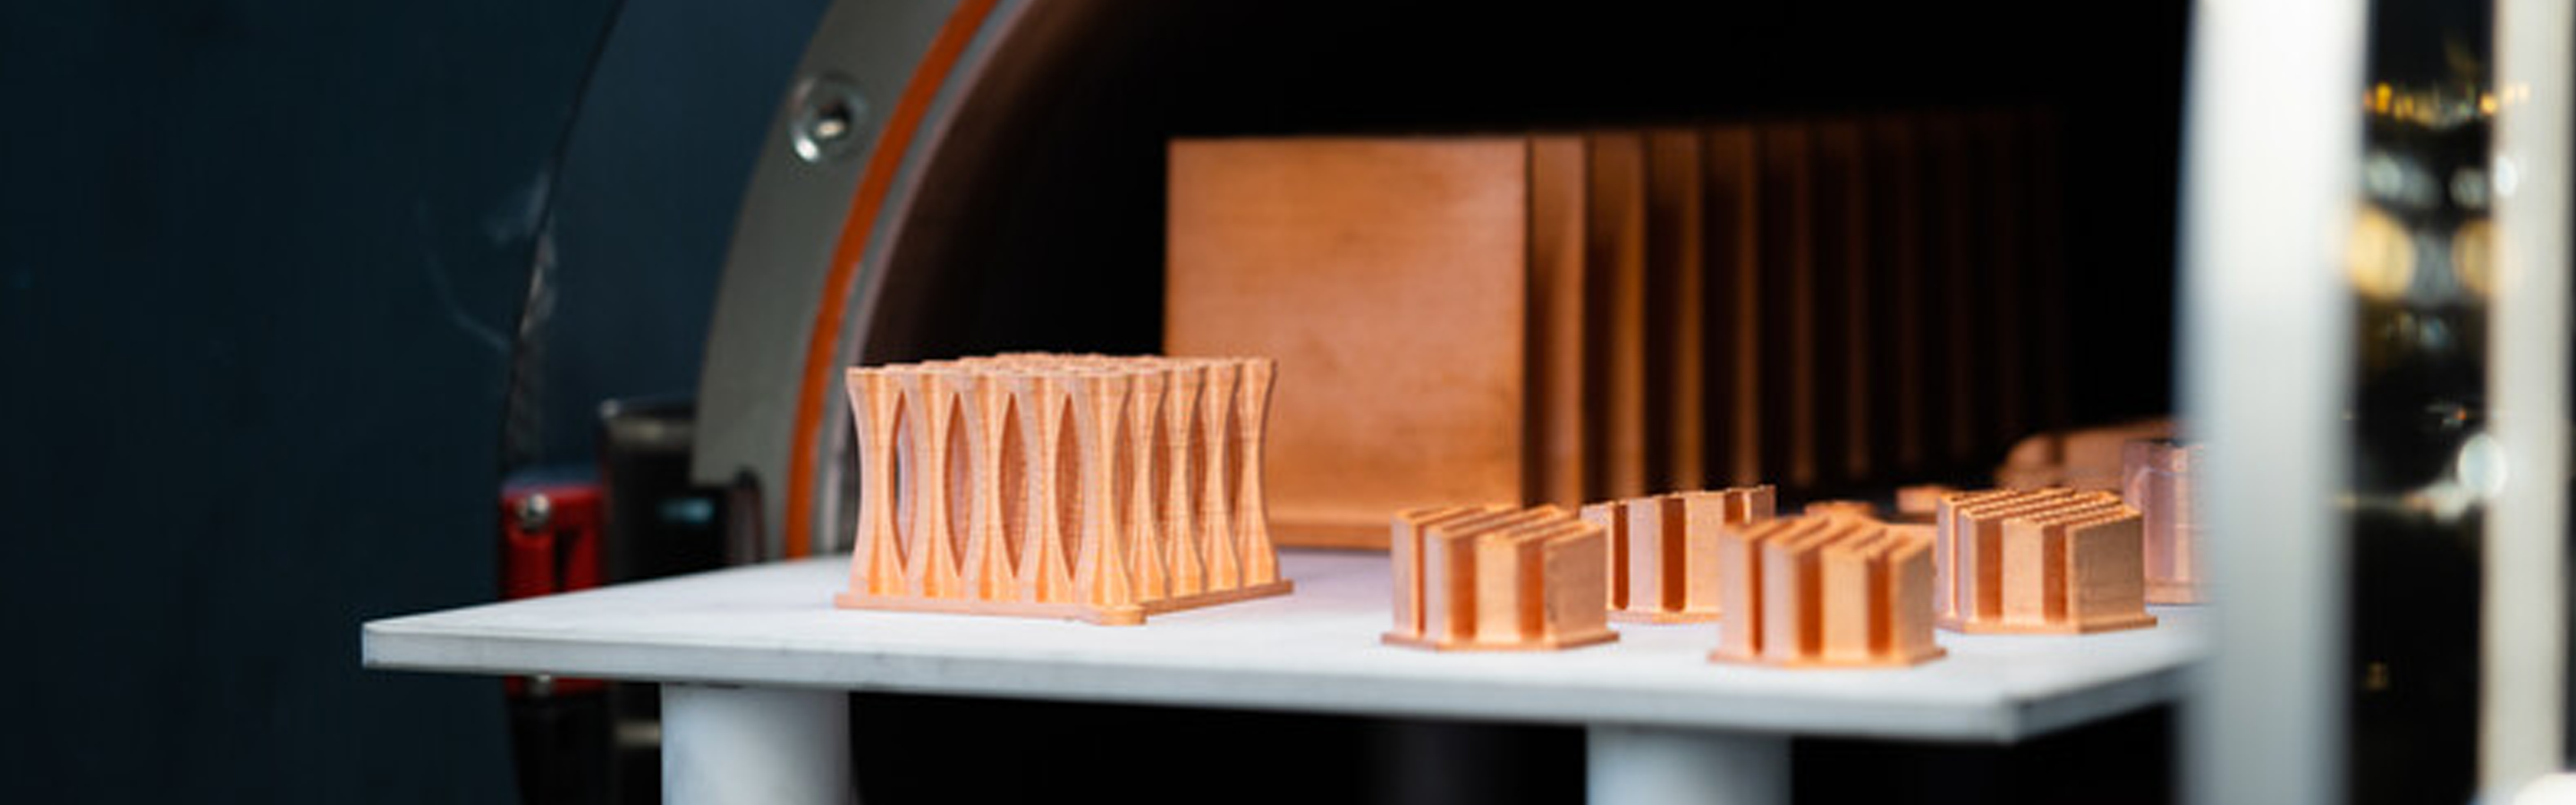 Rethinking the possibilities of manufacturing with 3D metal printing